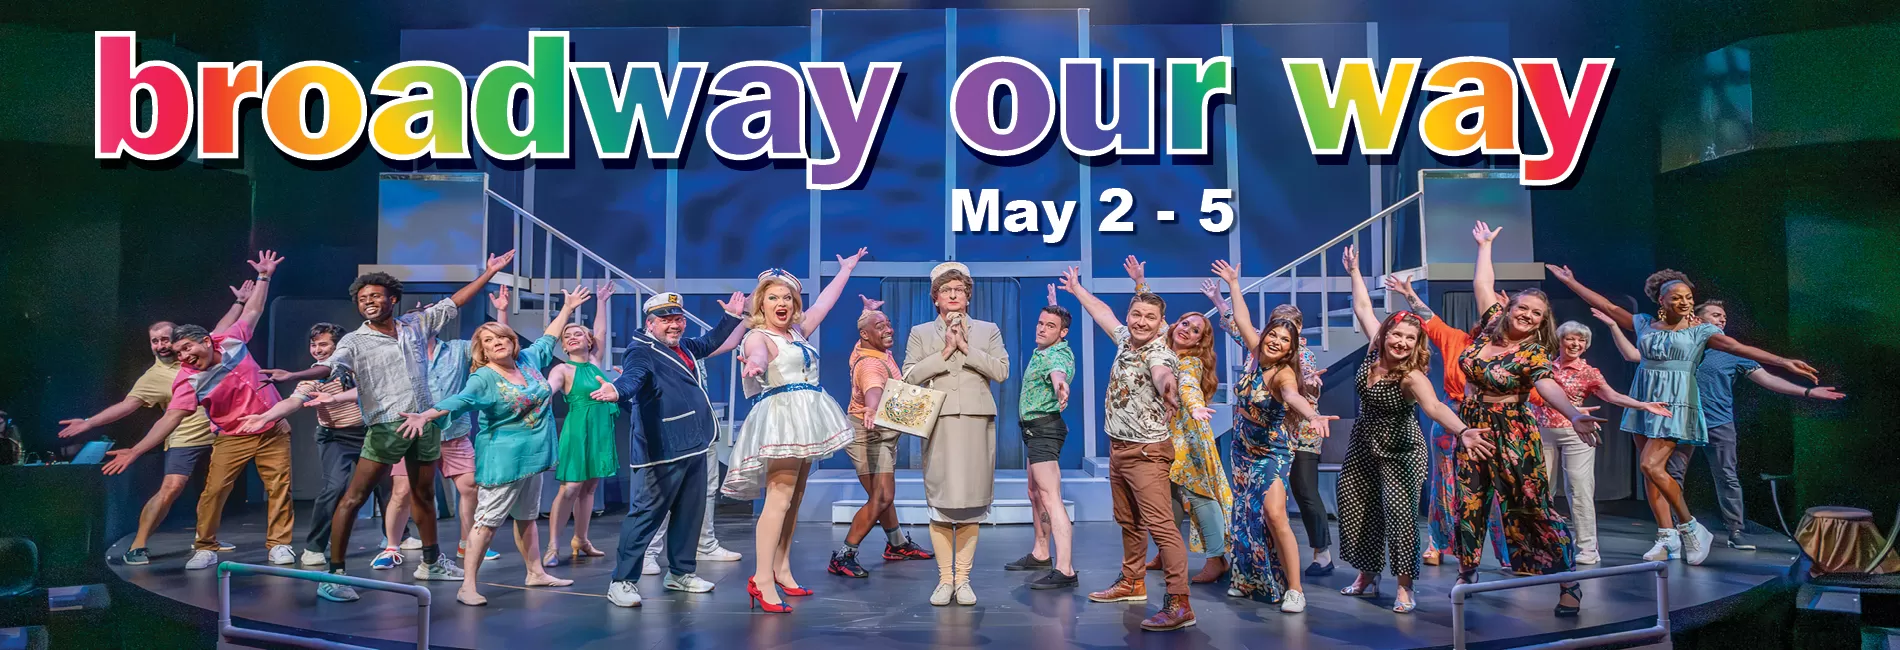 BROADWAY OUR WAY